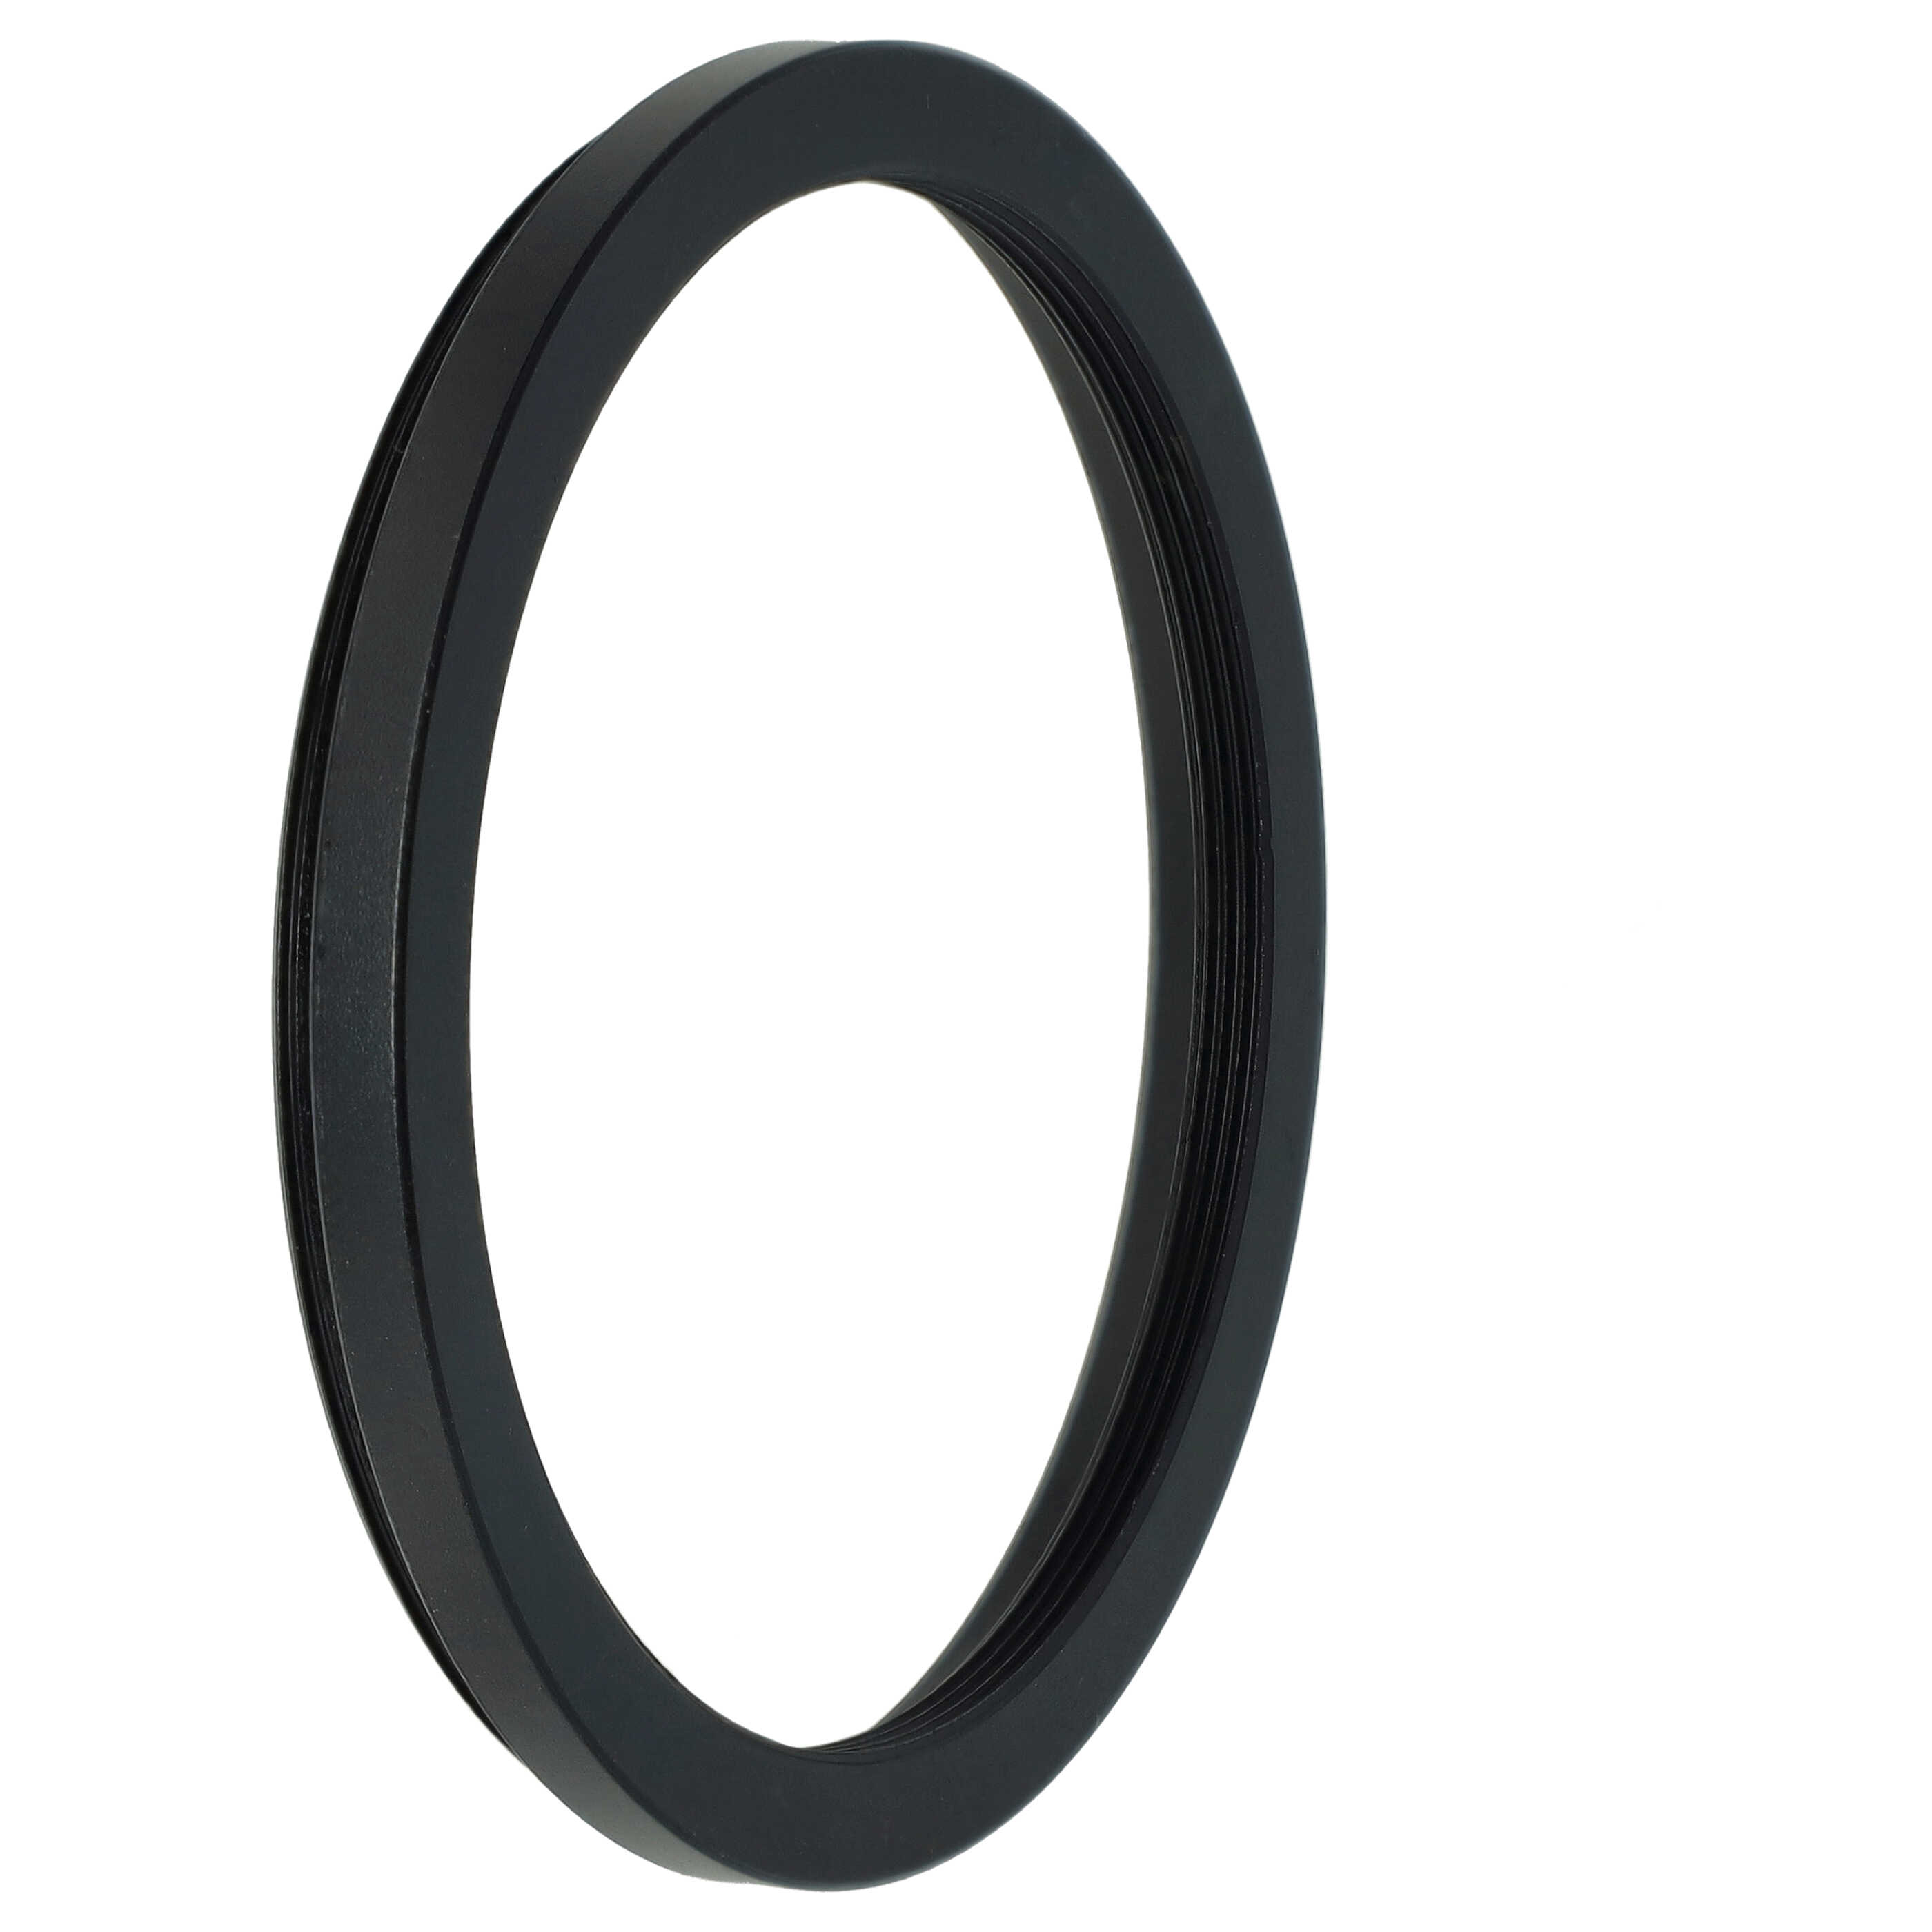 Step-Down Ring Adapter from 58 mm to 52 mm suitable for Camera Lens - Filter Adapter, metal